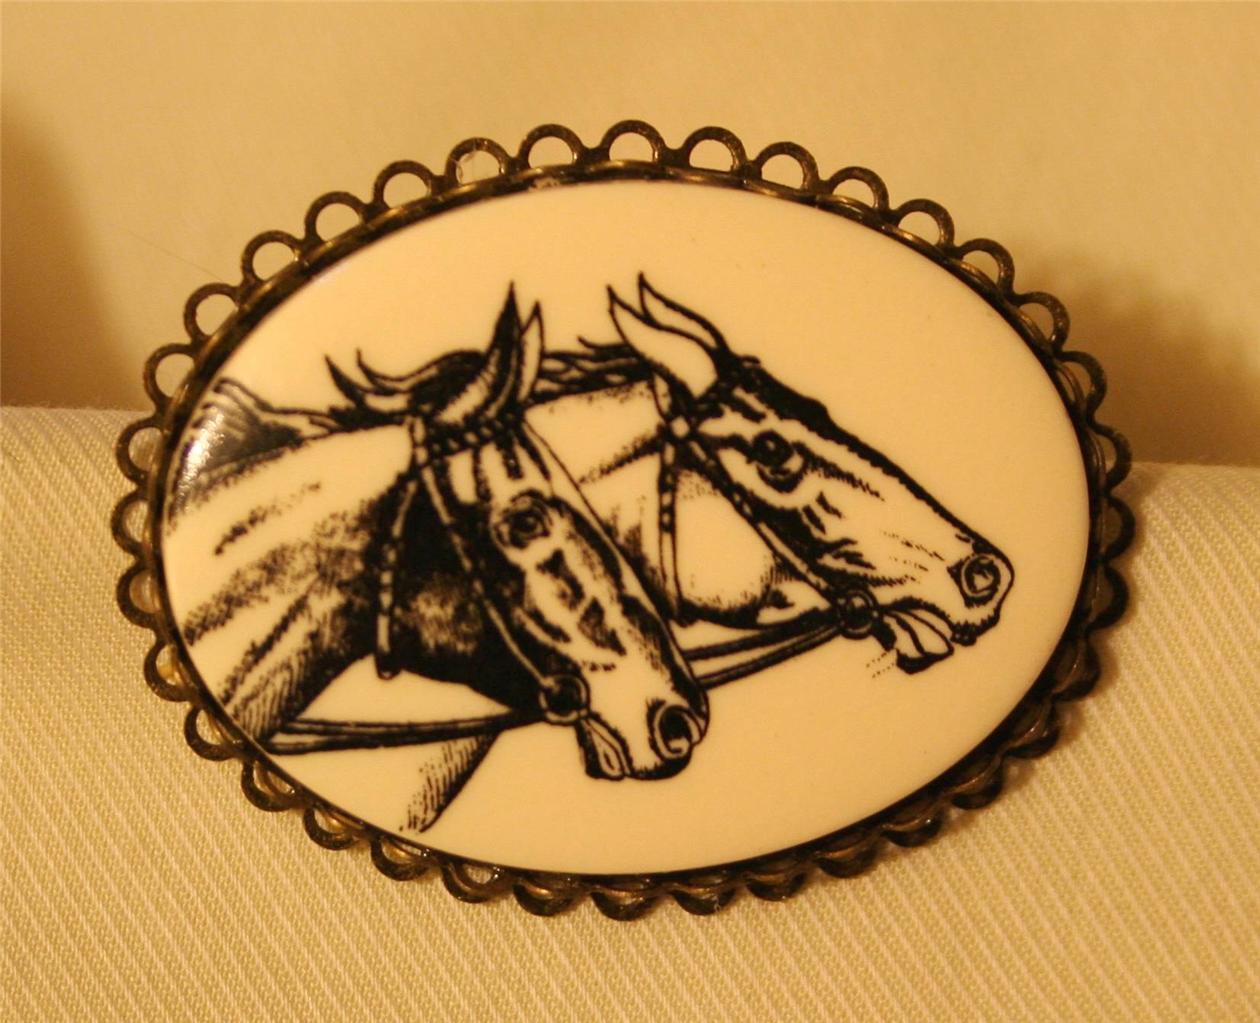 Handsome Brasstone Picot Rimmed Etched Cream & Black Pair of Horses Brooch Pin